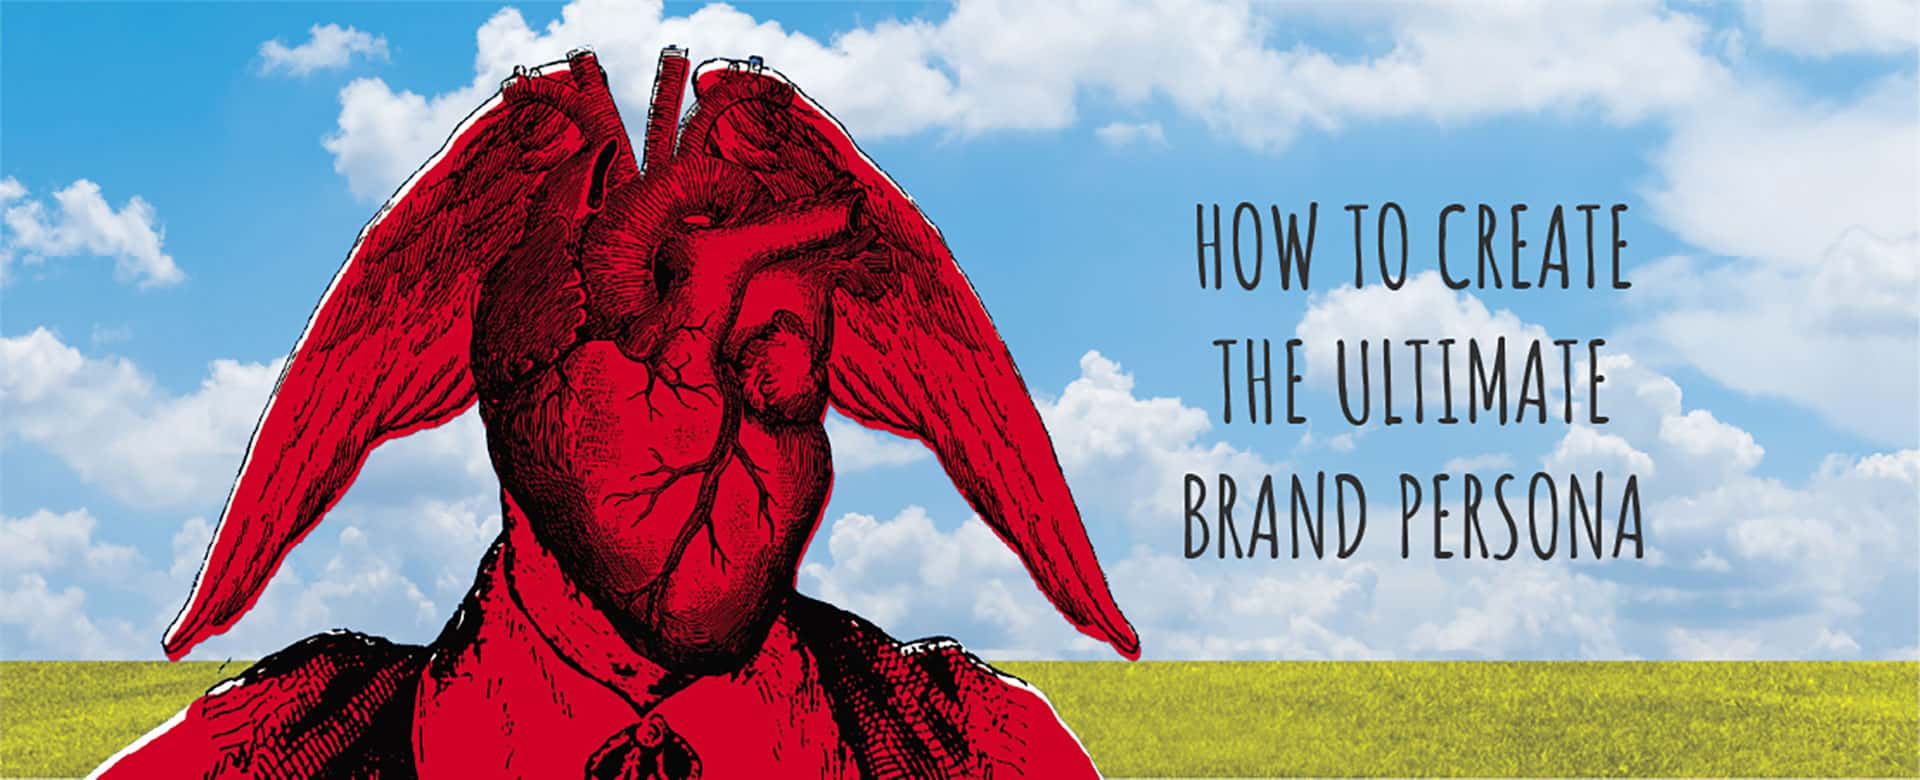 How to Create the Ultimate Brand Persona